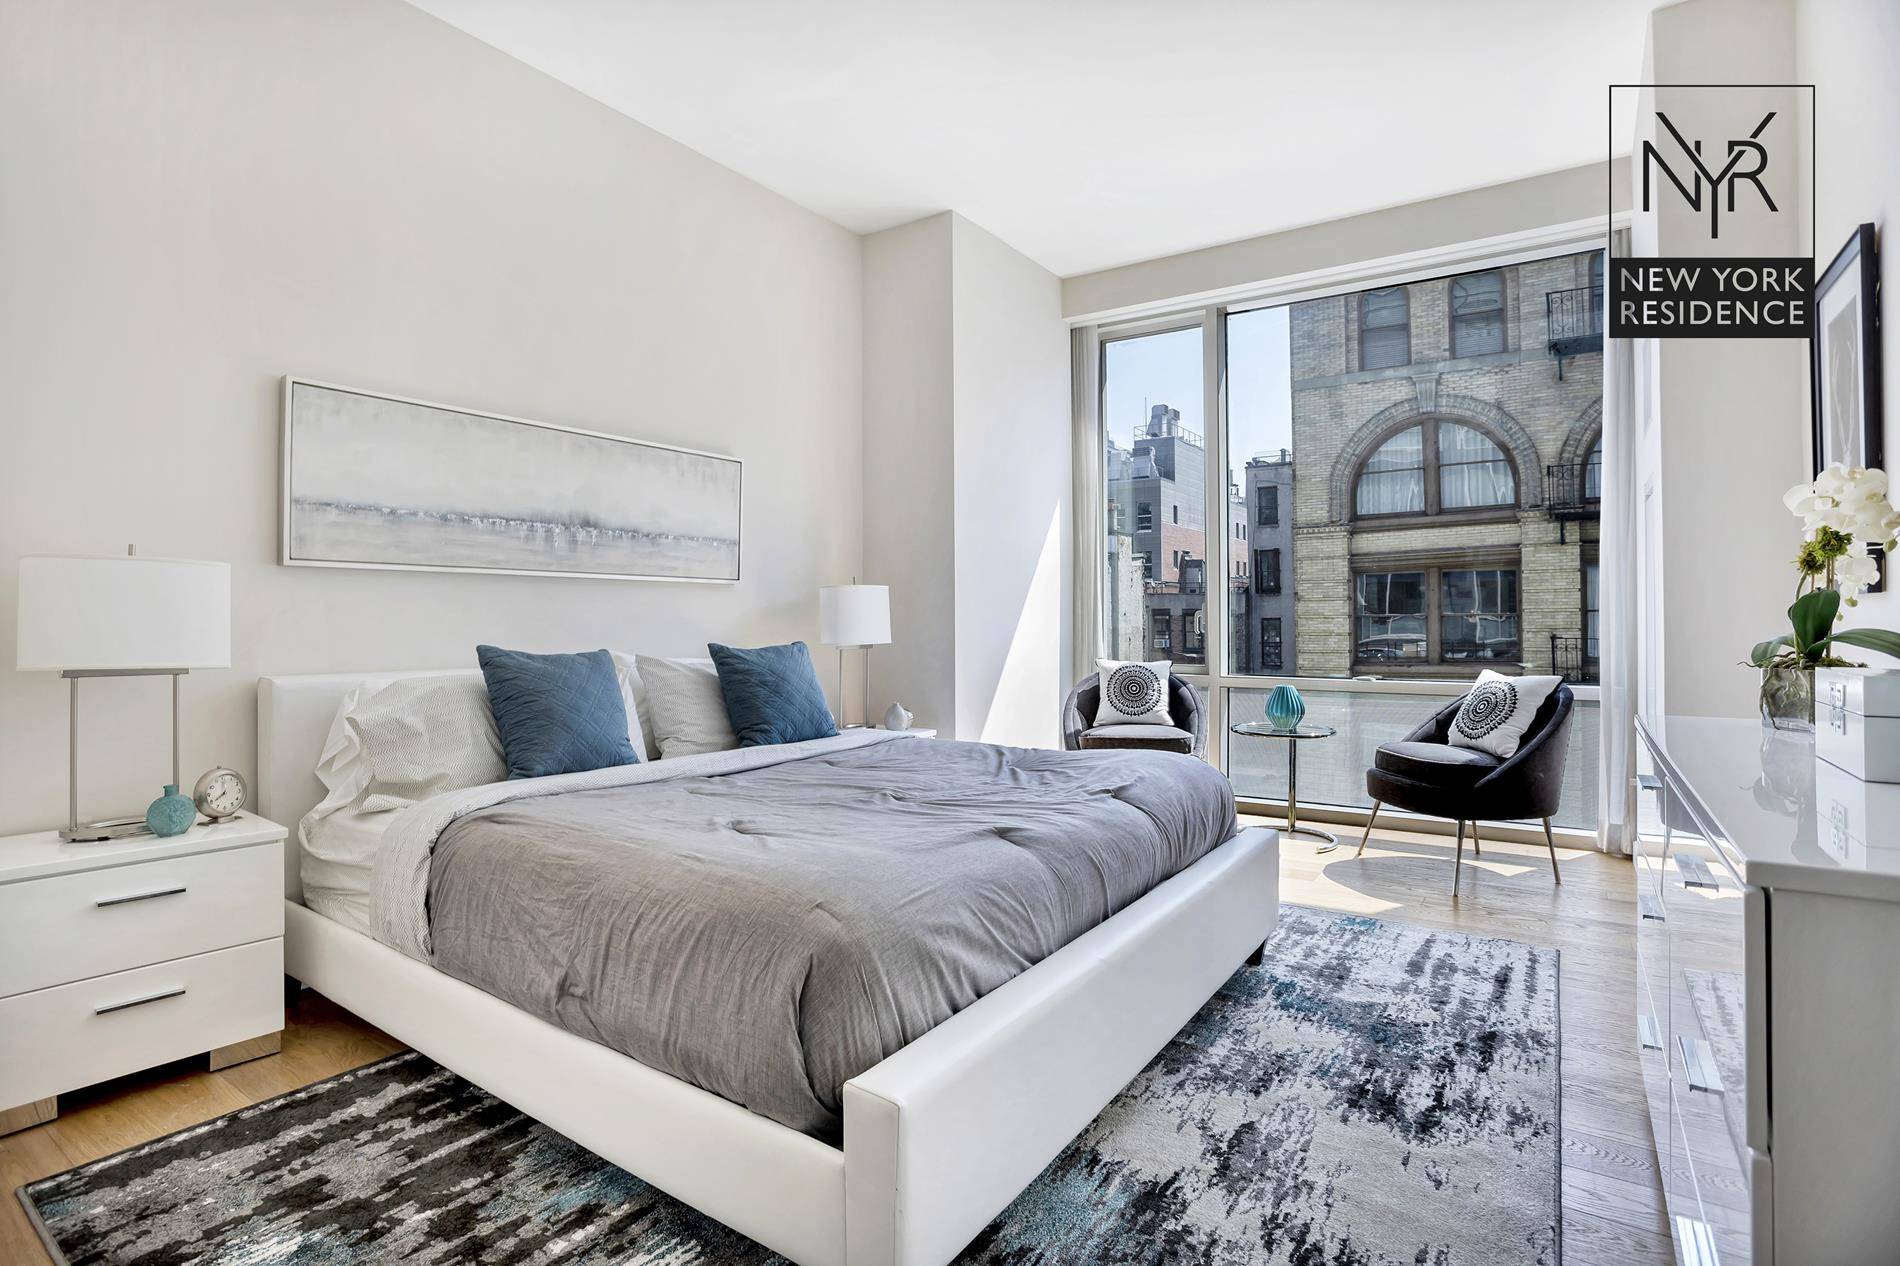 In person showings begin August 1st Designed by Gwathmey Siegel amp ; Associates Architects and completed in 2007, 311 West Broadway is one of the few modern luxury condominiums located ...